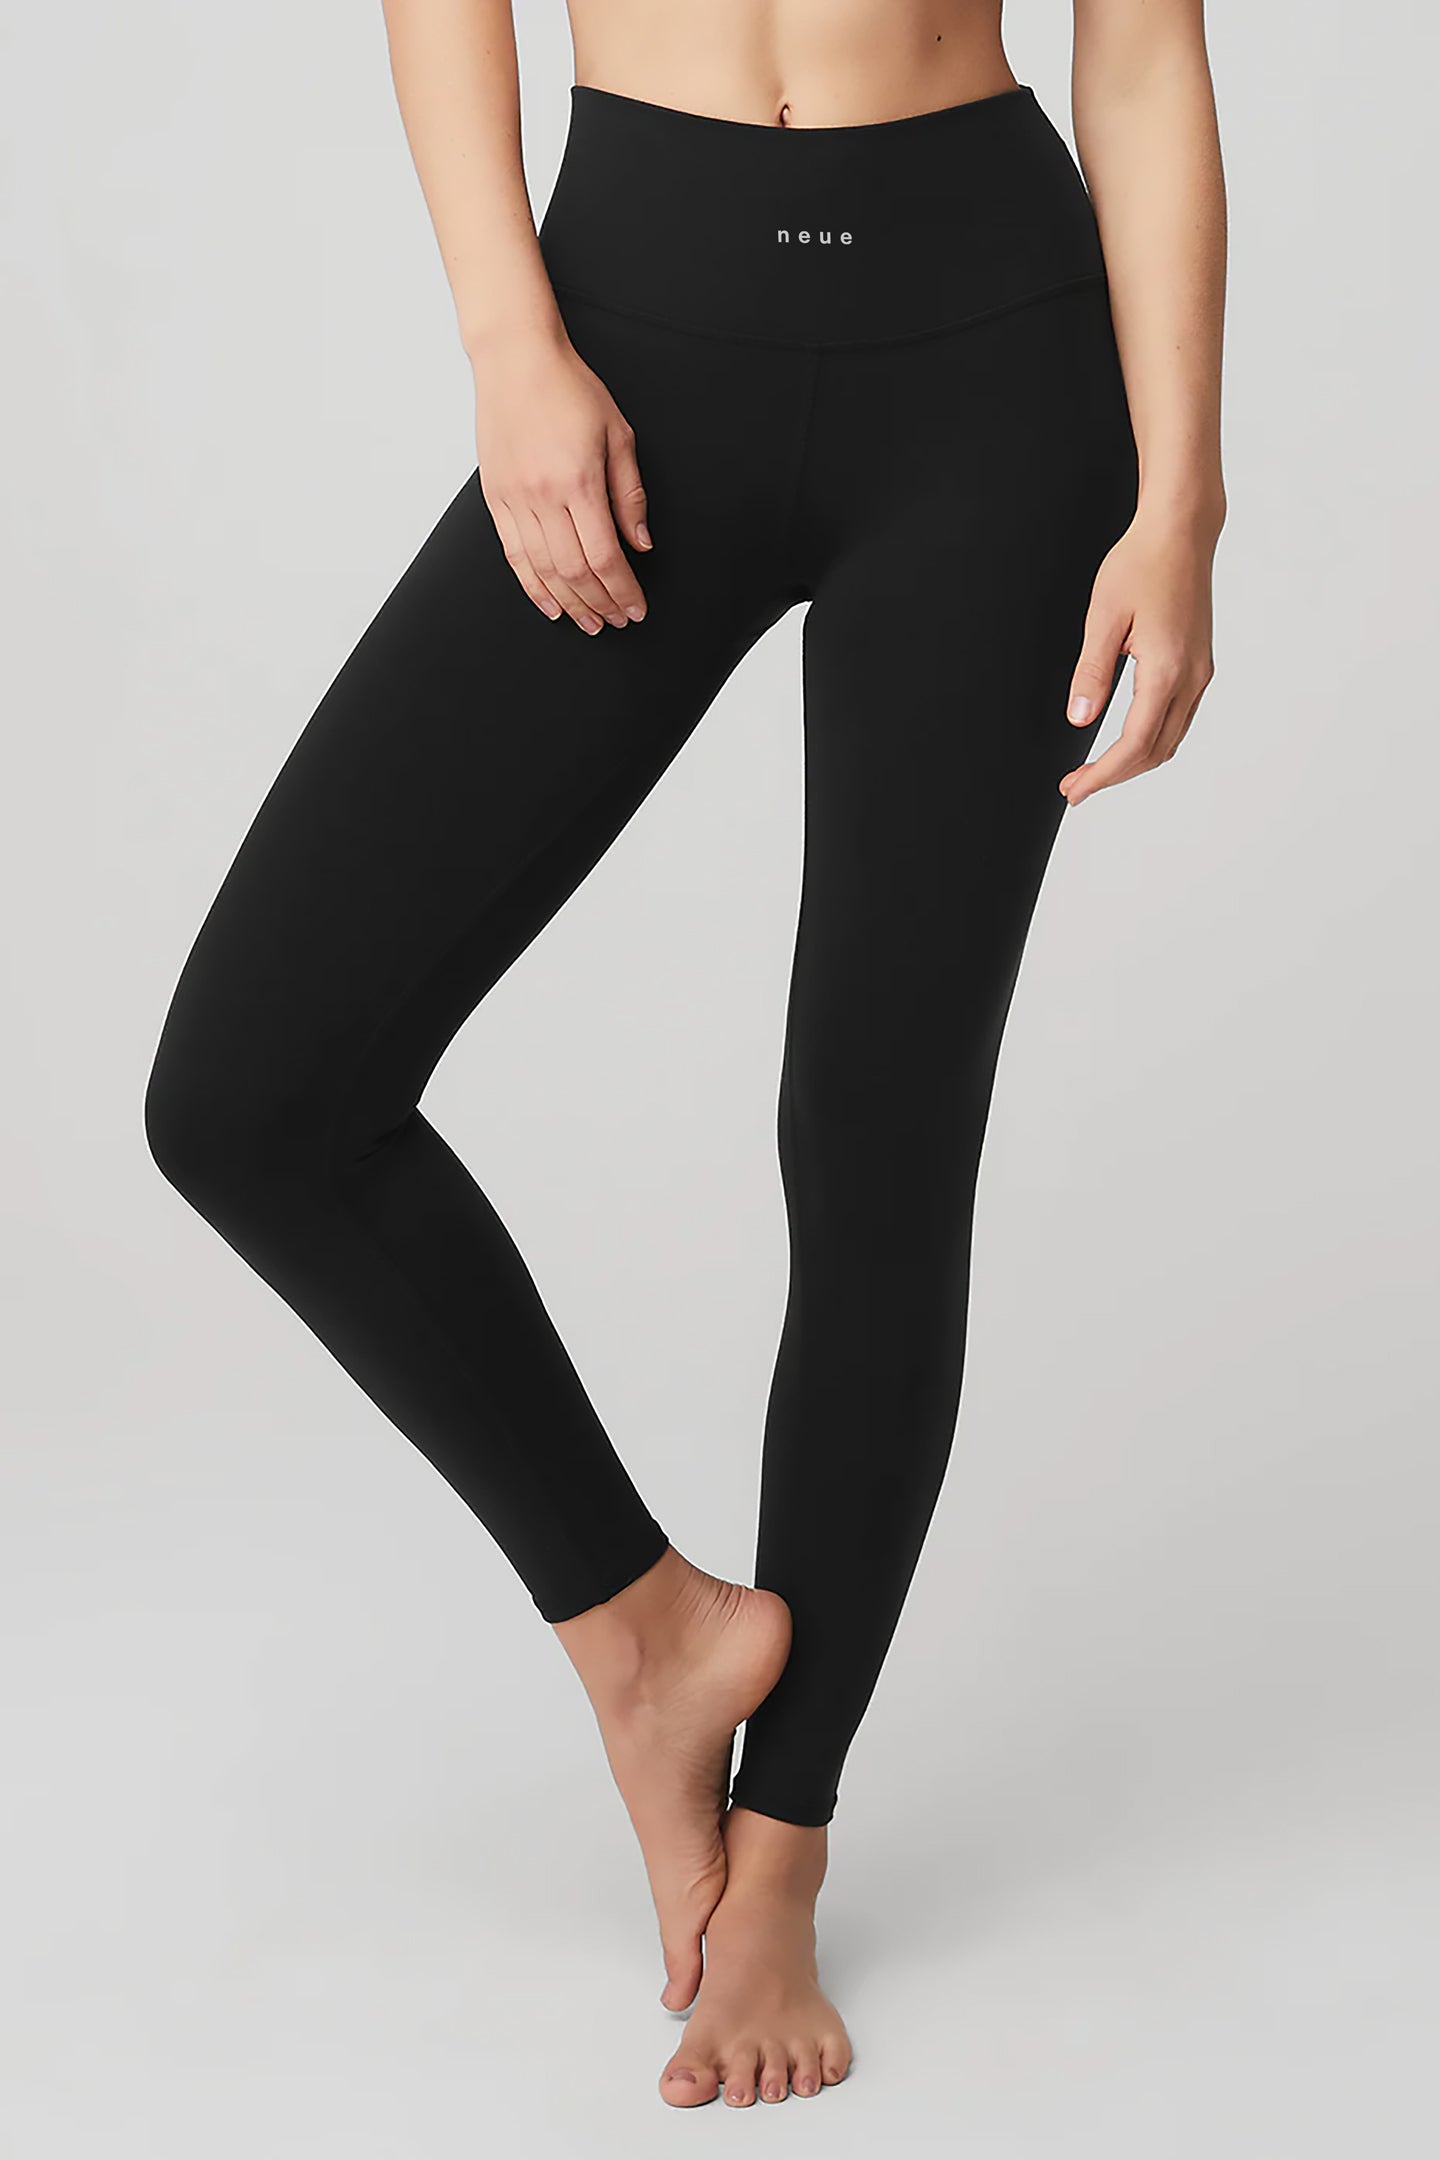 Stay motivated with these Athleta Elation Tights